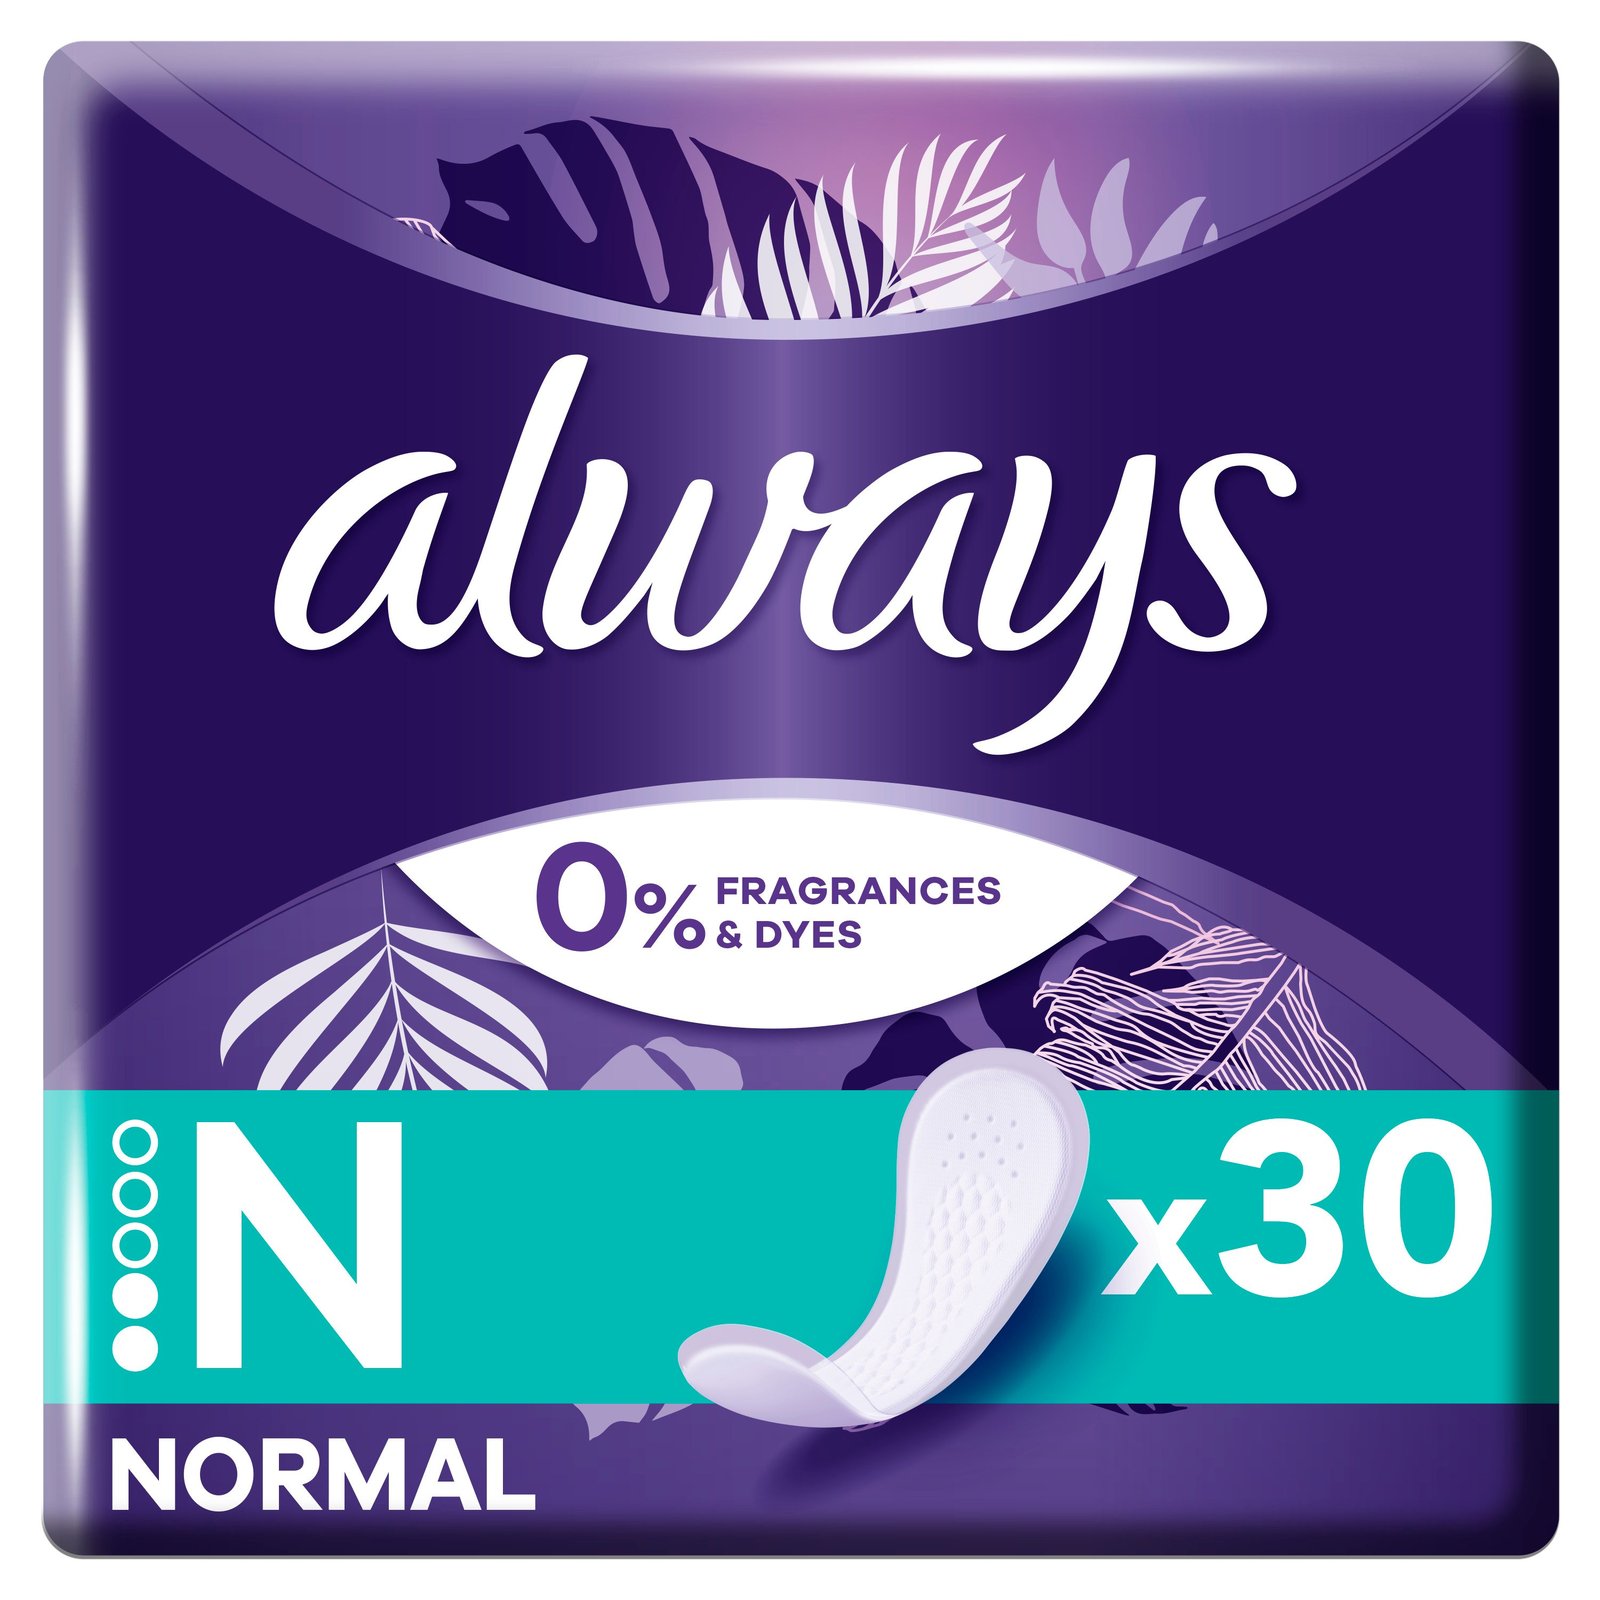 Always Dailies Normal Fresh & Protect Trosskydd 30 st